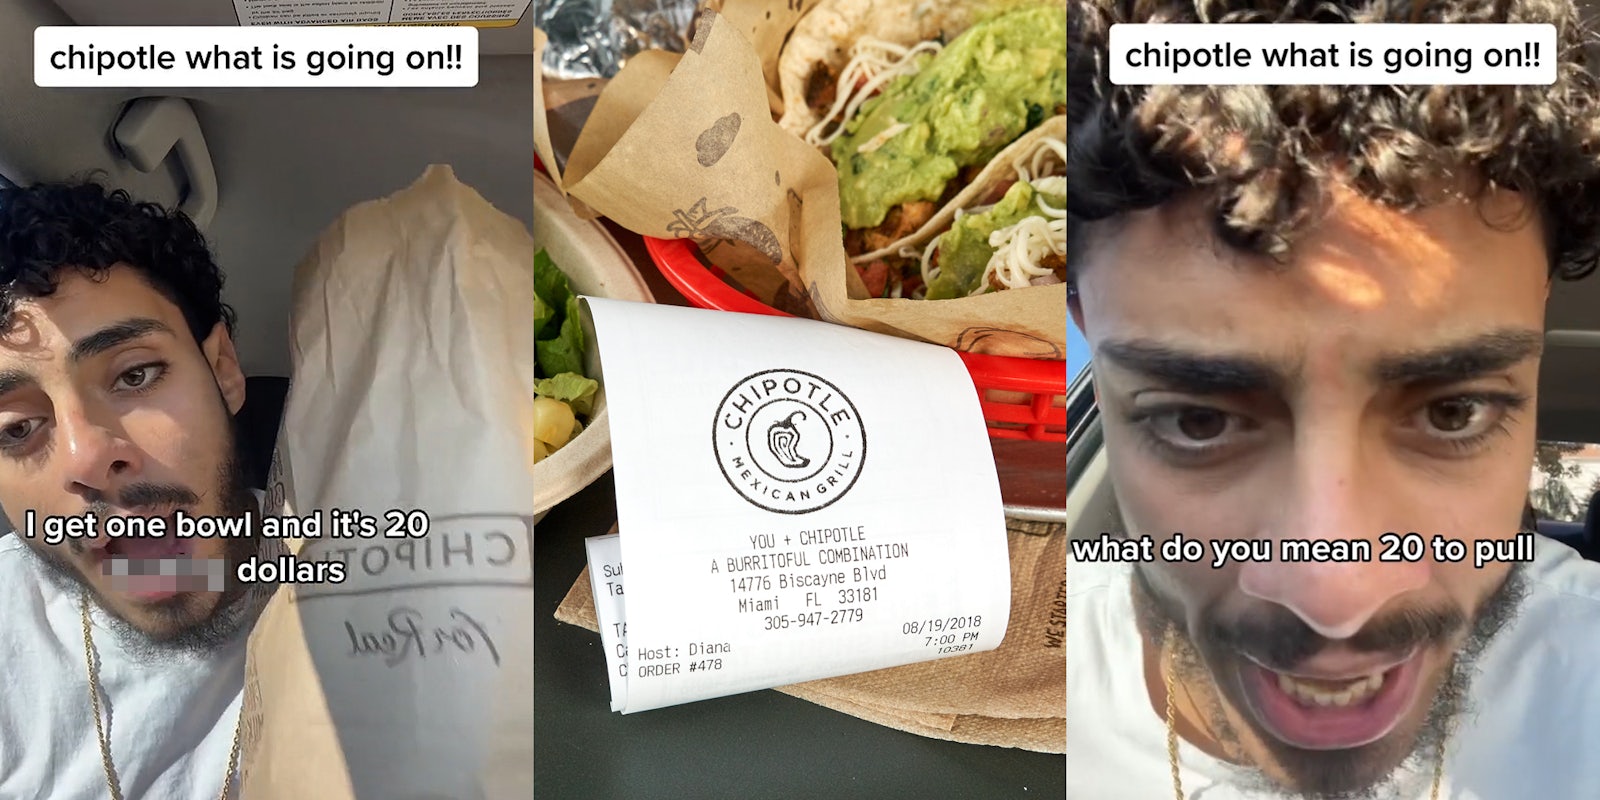 man speaking in car caption 'chipotle what is going on!!' 'I get one bowl and it's 20 blank dollars' (l) Chipotle receipt with food (c) man speaking in car caption 'chipotle what is going on!!' 'what do you mean 20 to pull' (r)